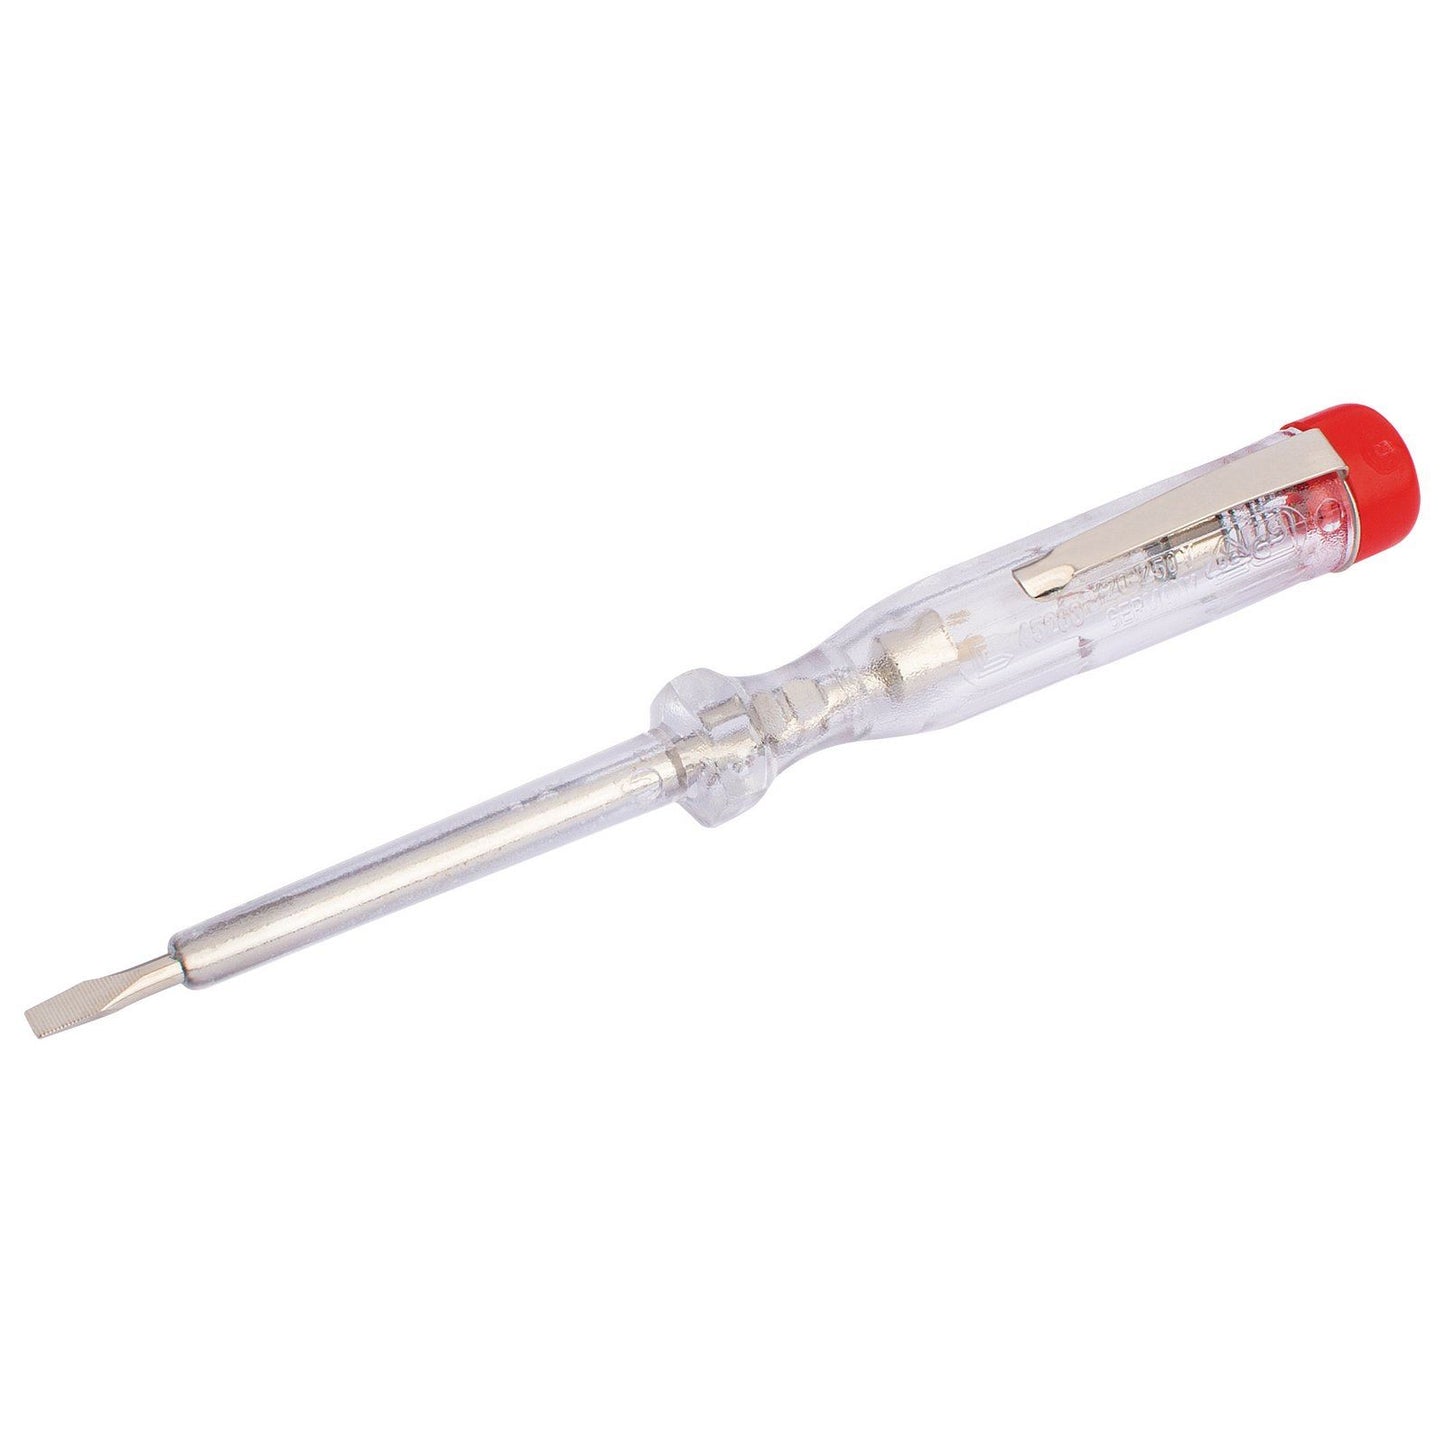 Draper 26446 Neon Test Screwdriver for Mains Testing for Circuit / Power Testing